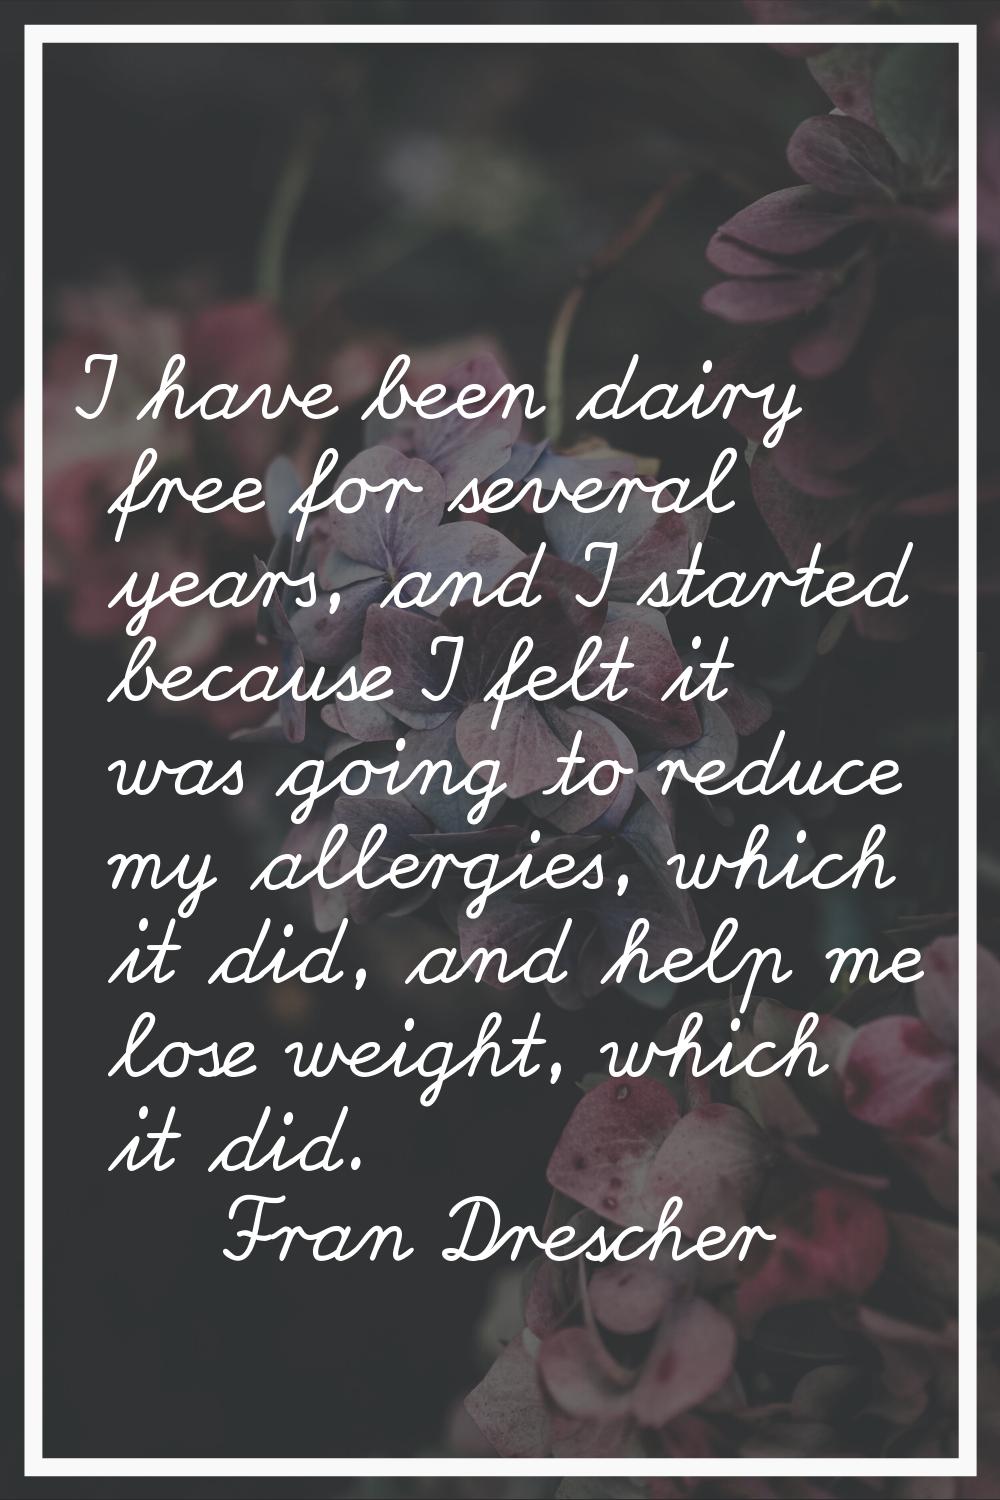 I have been dairy free for several years, and I started because I felt it was going to reduce my al